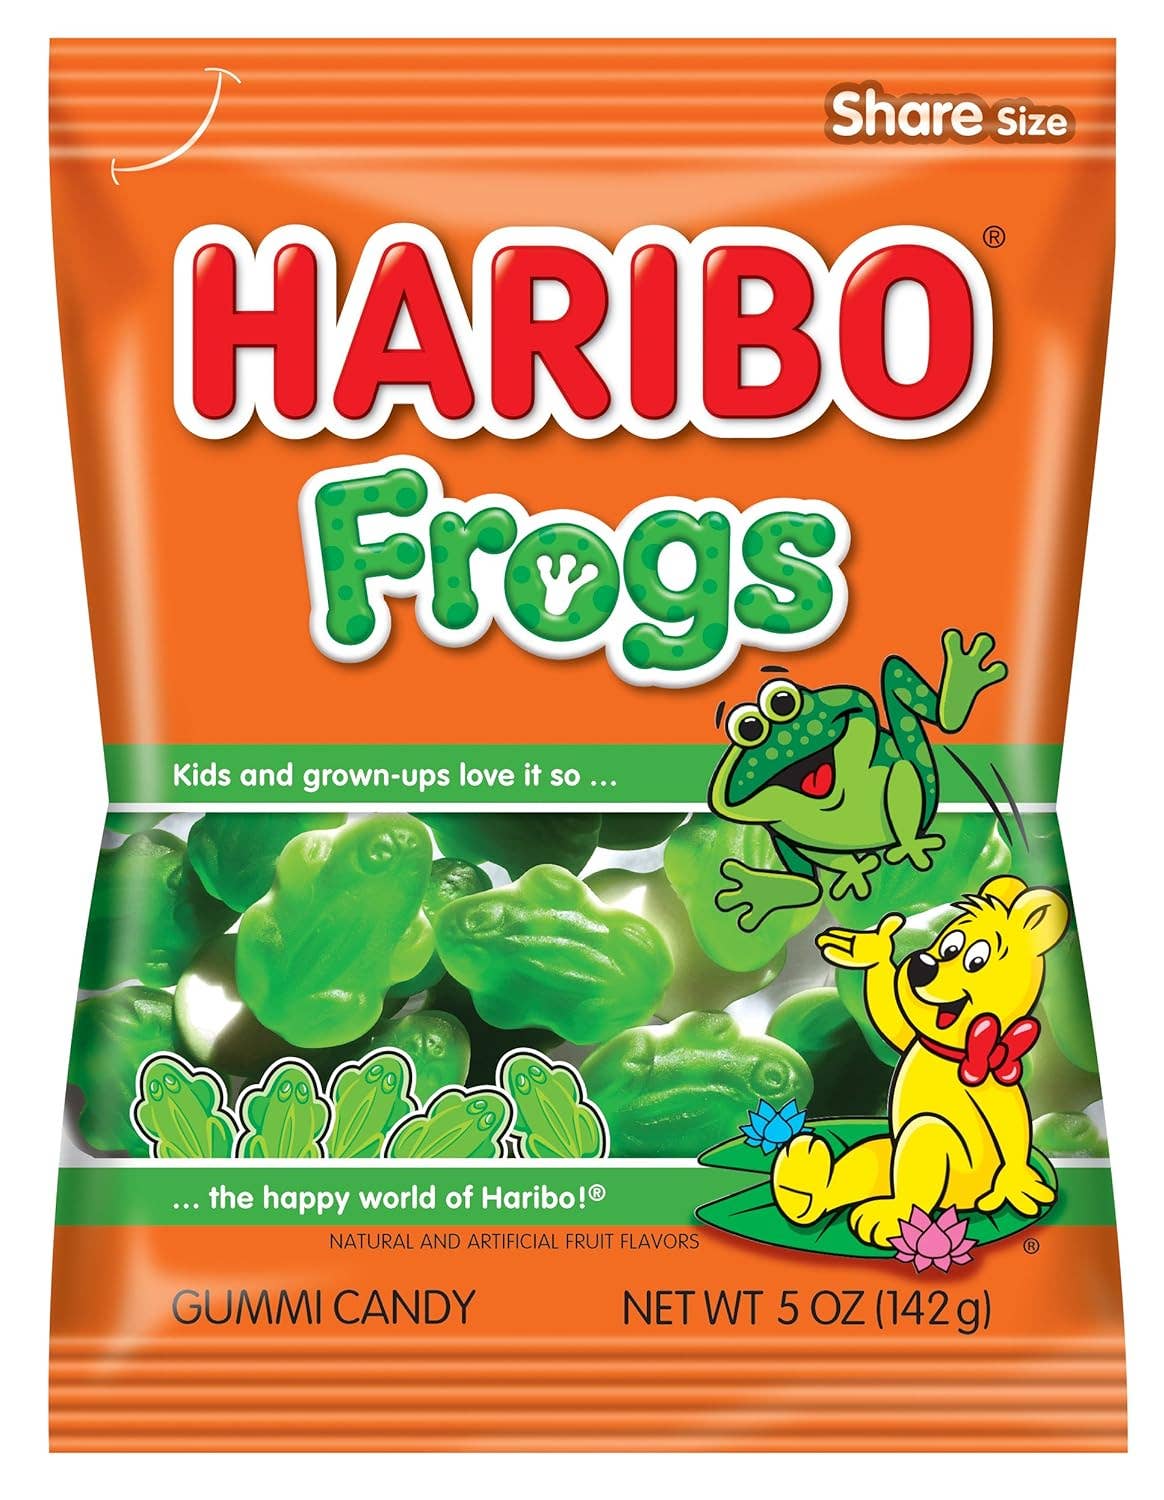 HARIBO Gummi Candy Frogs 5 oz. Bag (Pack of 12) ($2.25/Unit)